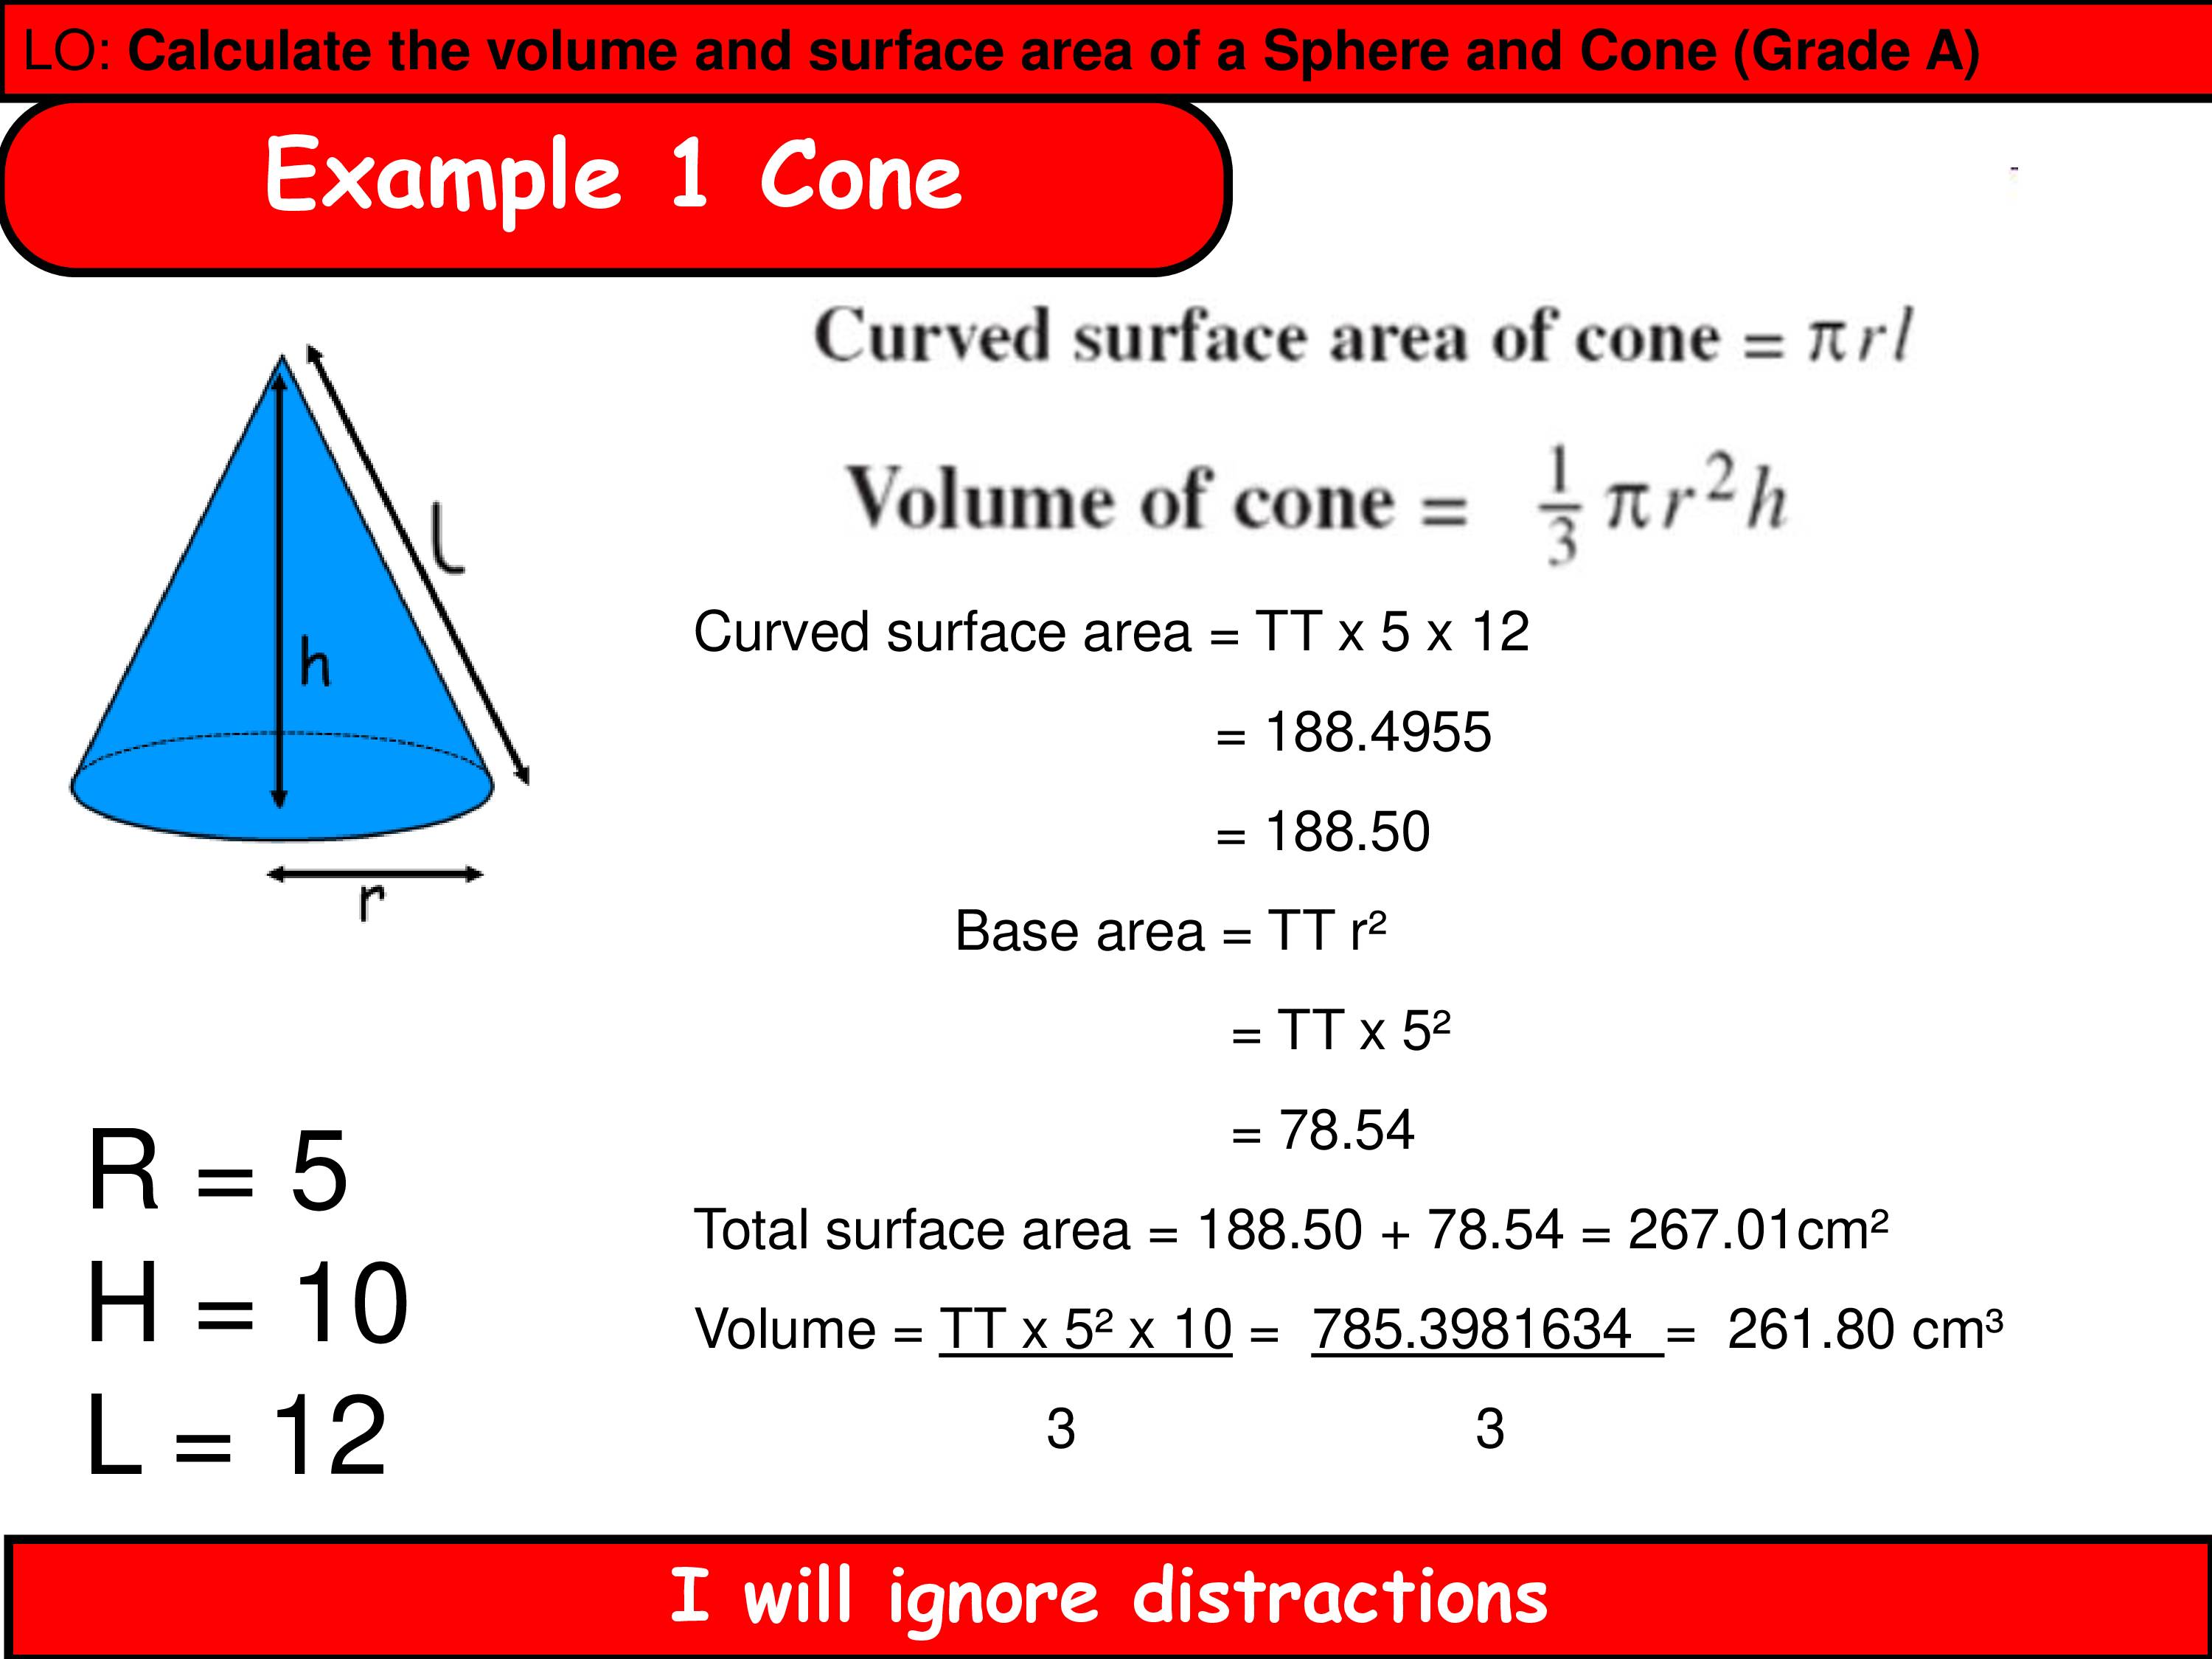 Calculating The Volume And Surface Area Of A Sphere And Cone